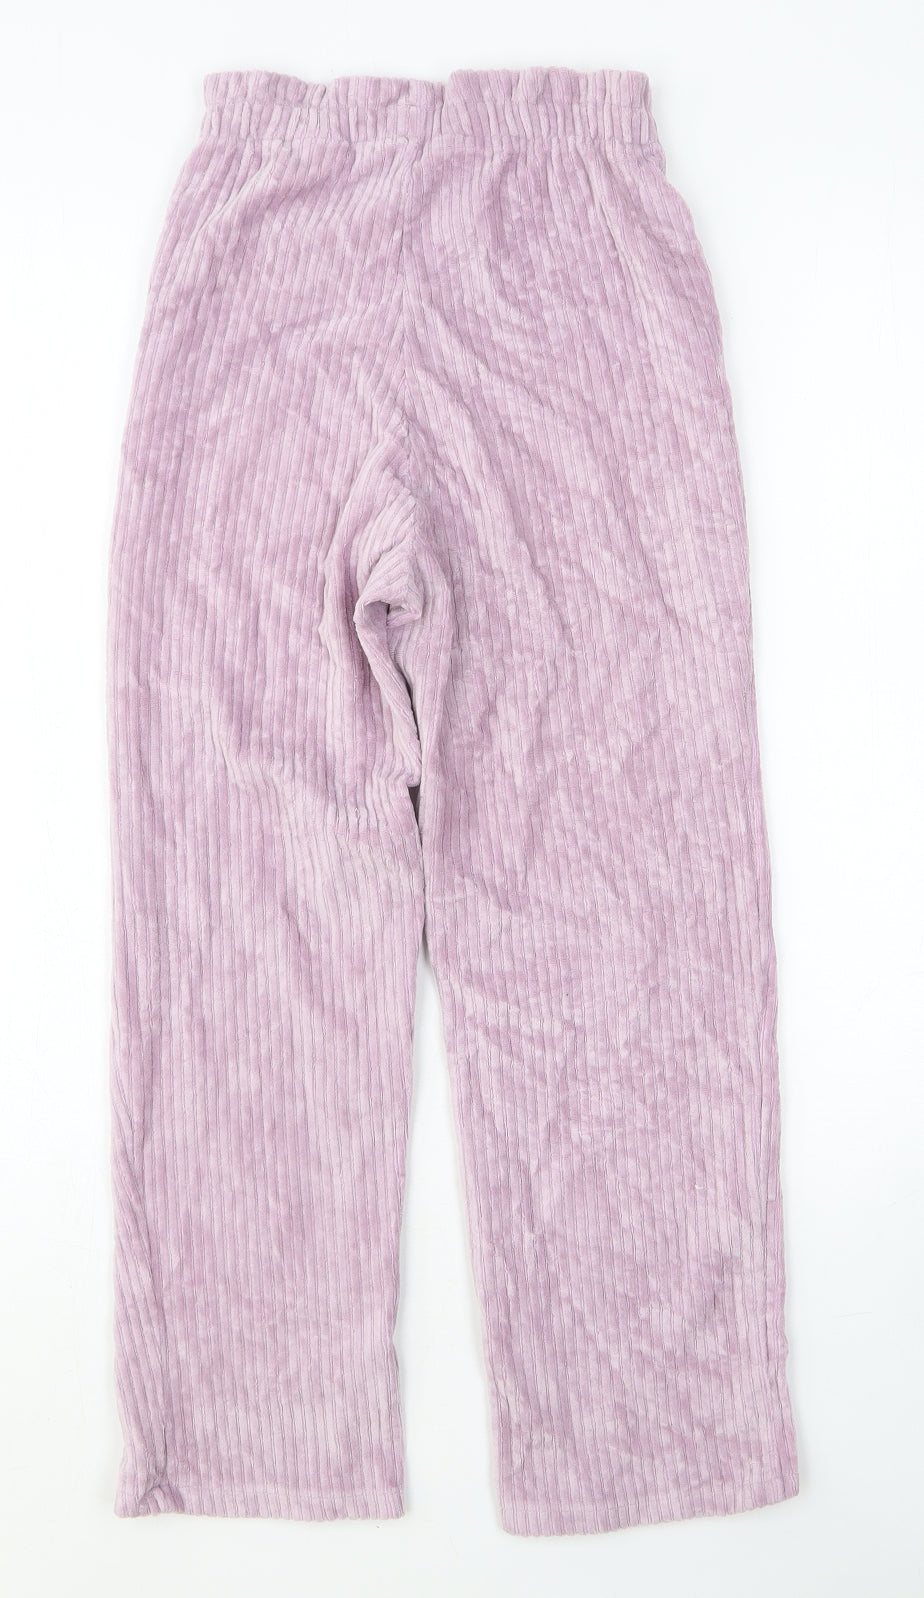 H&M Girls Purple Cotton Jogger Trousers Size 9 Years Regular Pullover